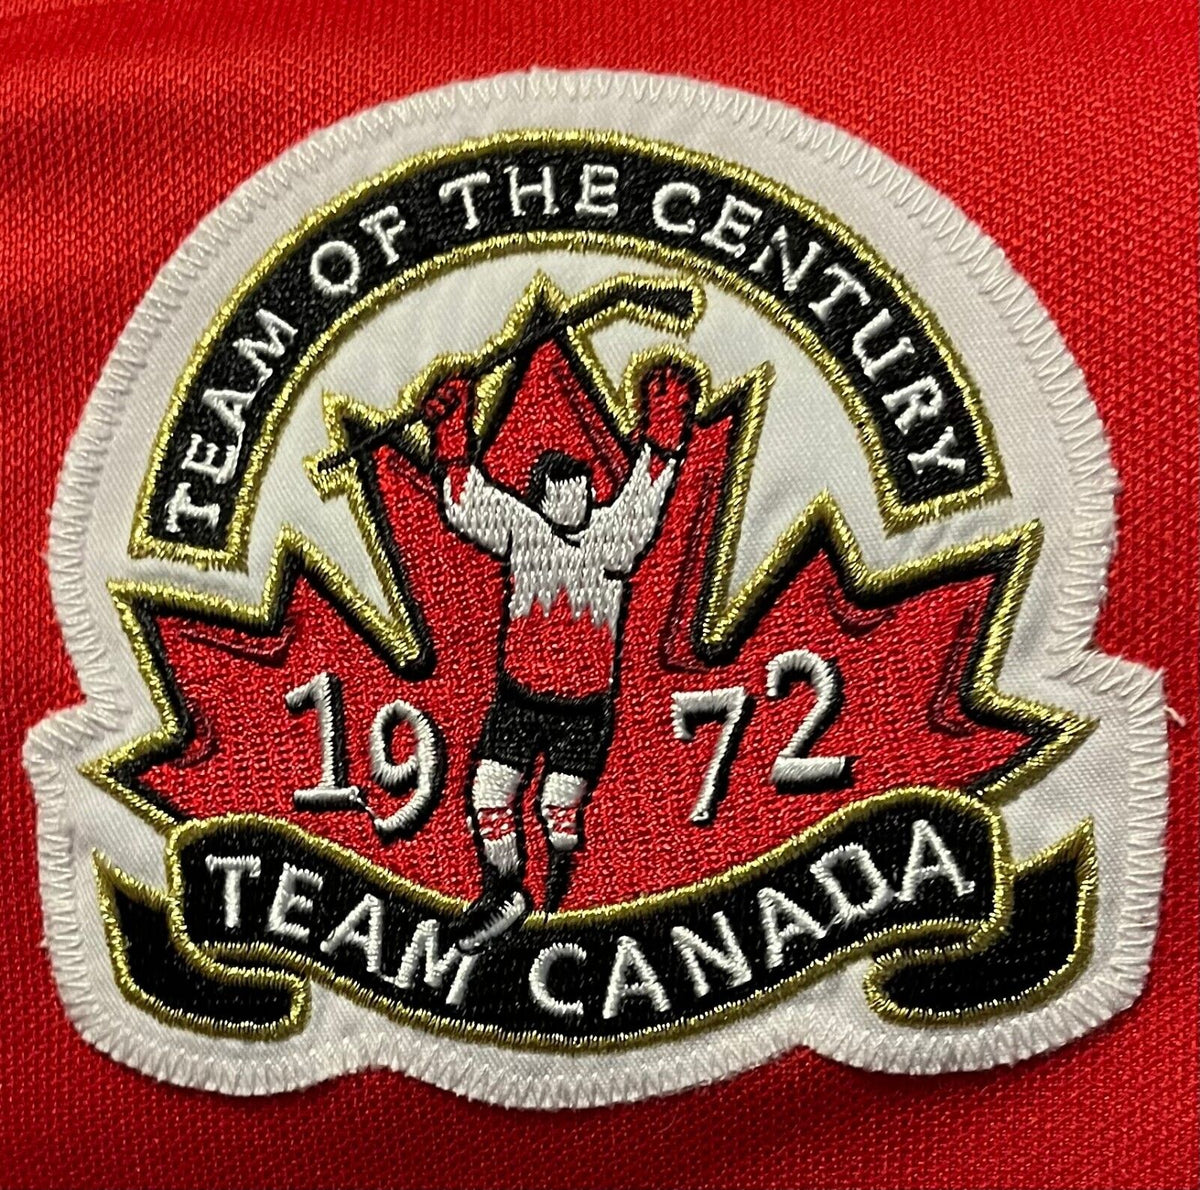 The Hockey Source - Paul Henderson Signed Team Canada Jersey